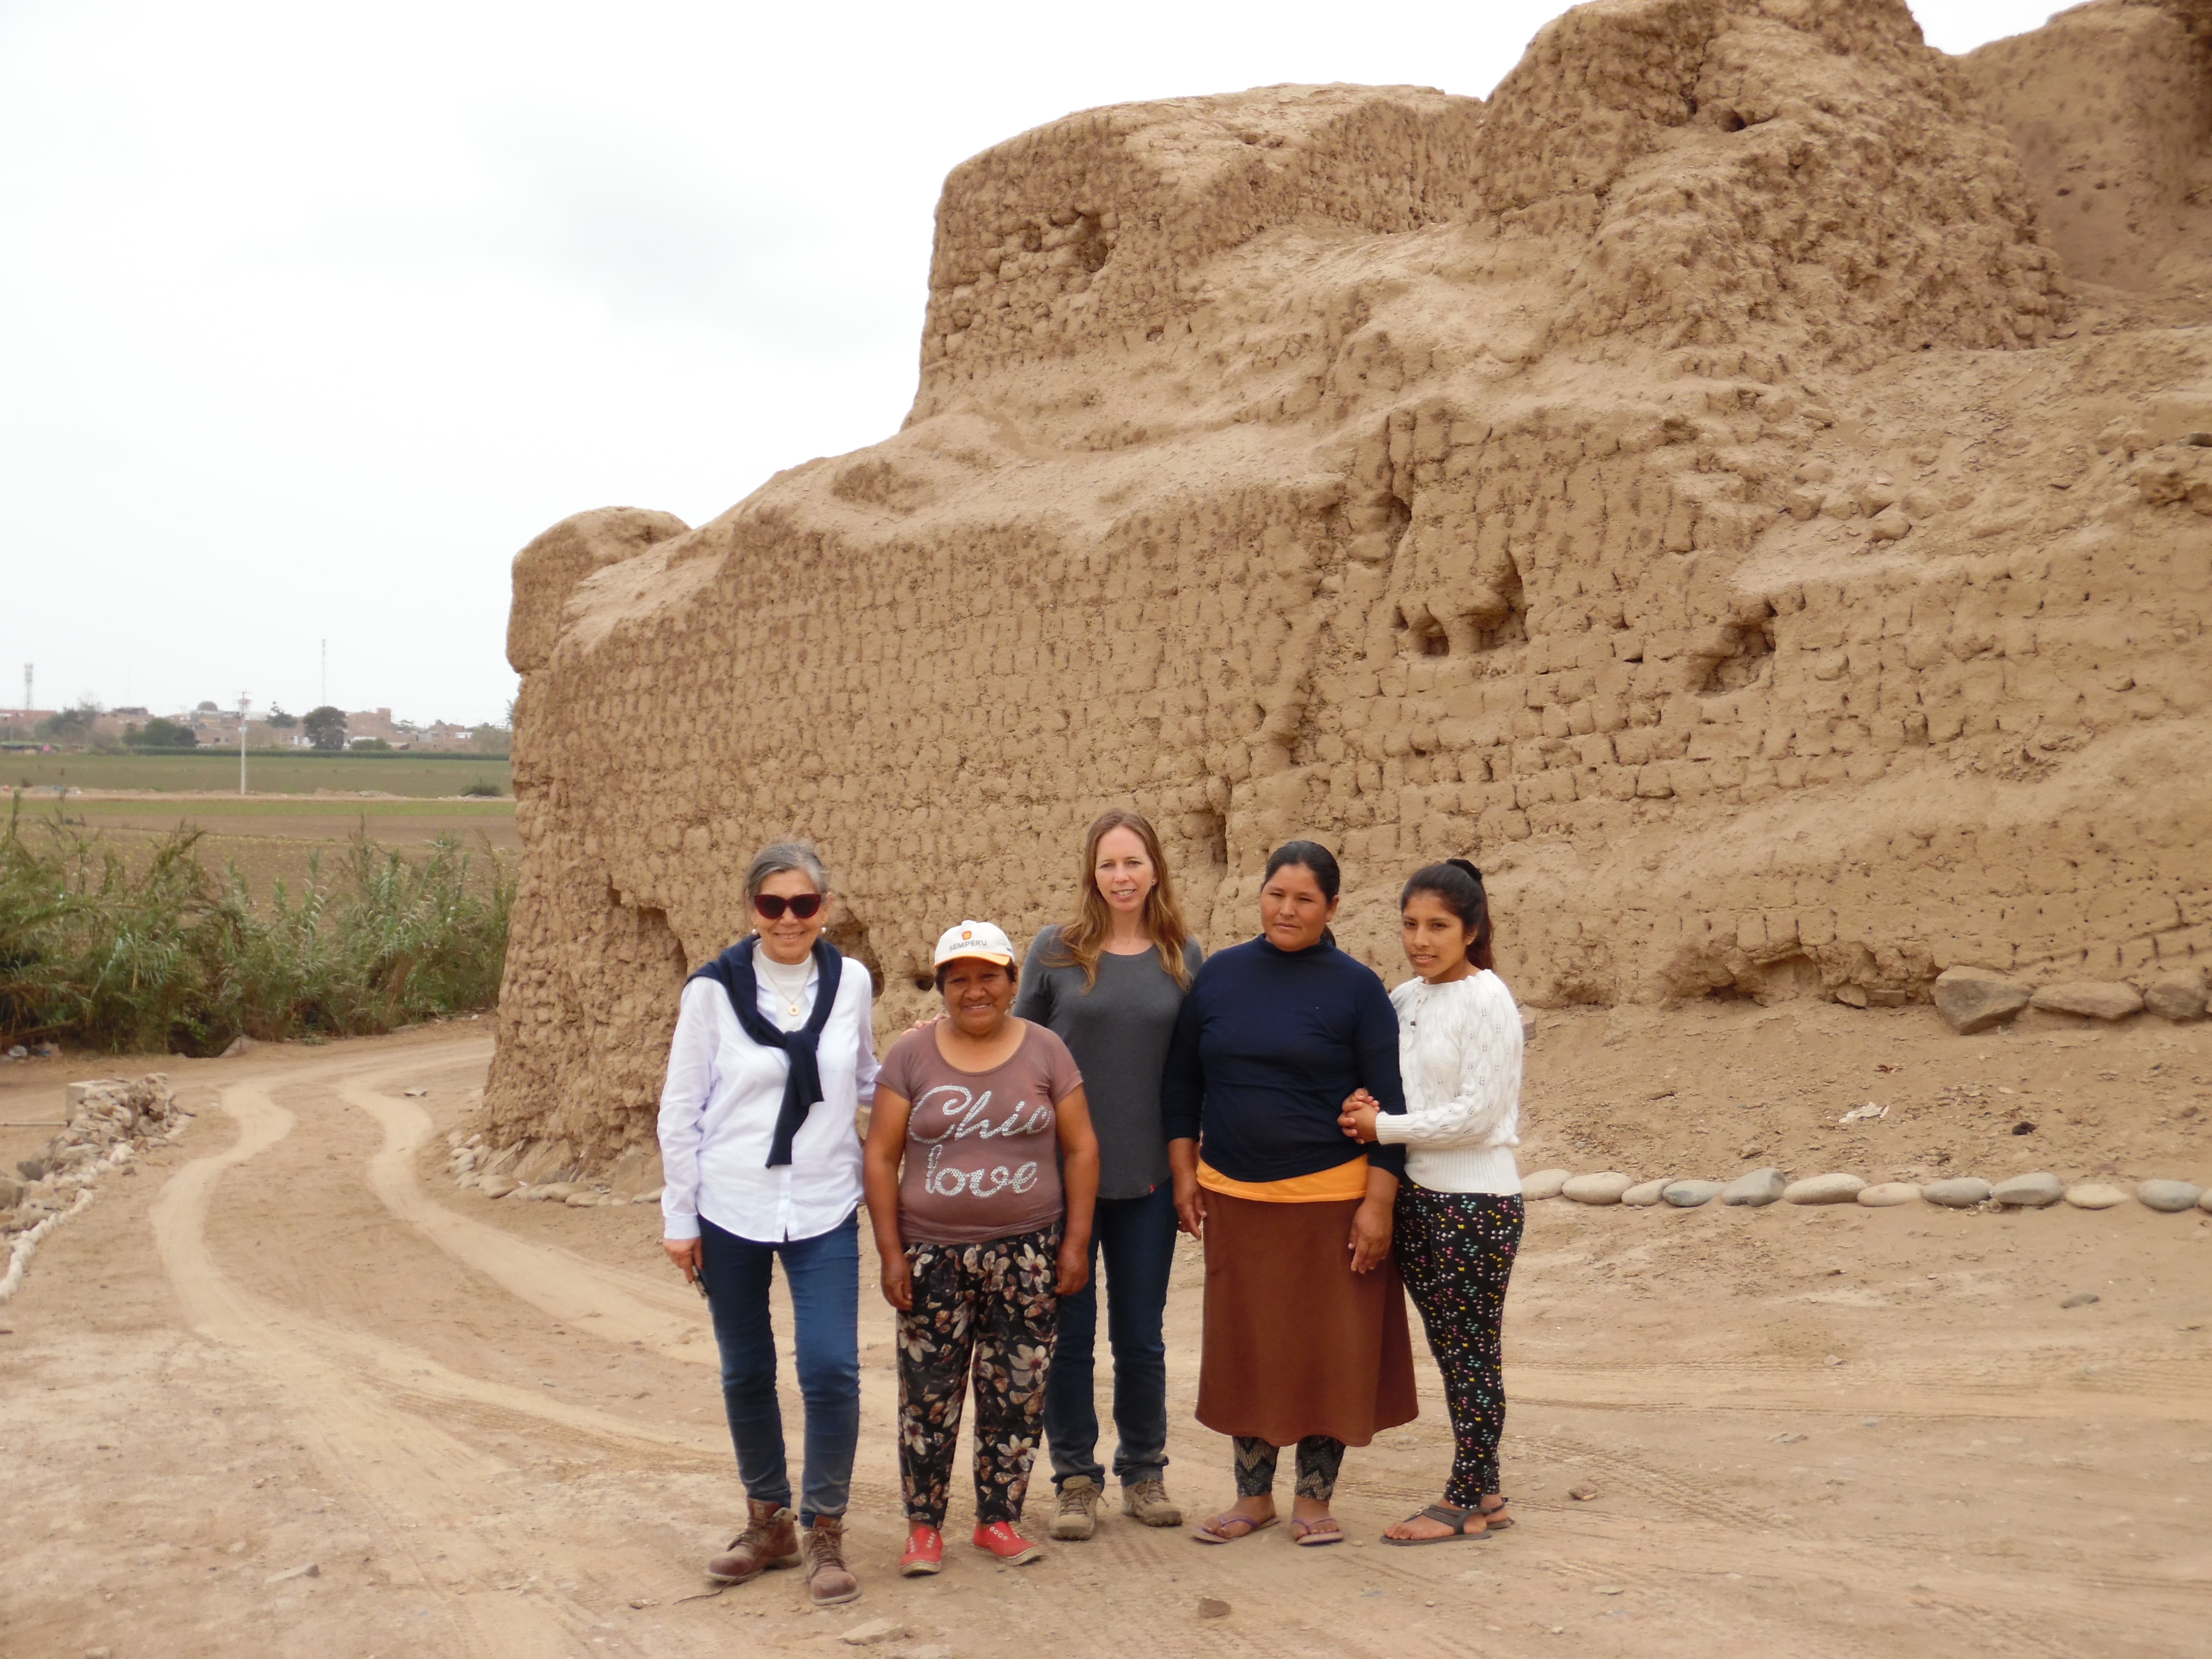 Martha Zegarra (Executive Director, WMF Peru), Francesca Fernandini (Archaeological Program Director, Cerro de Oro), and a group of local women stand in front of the wall that surrounds the site.